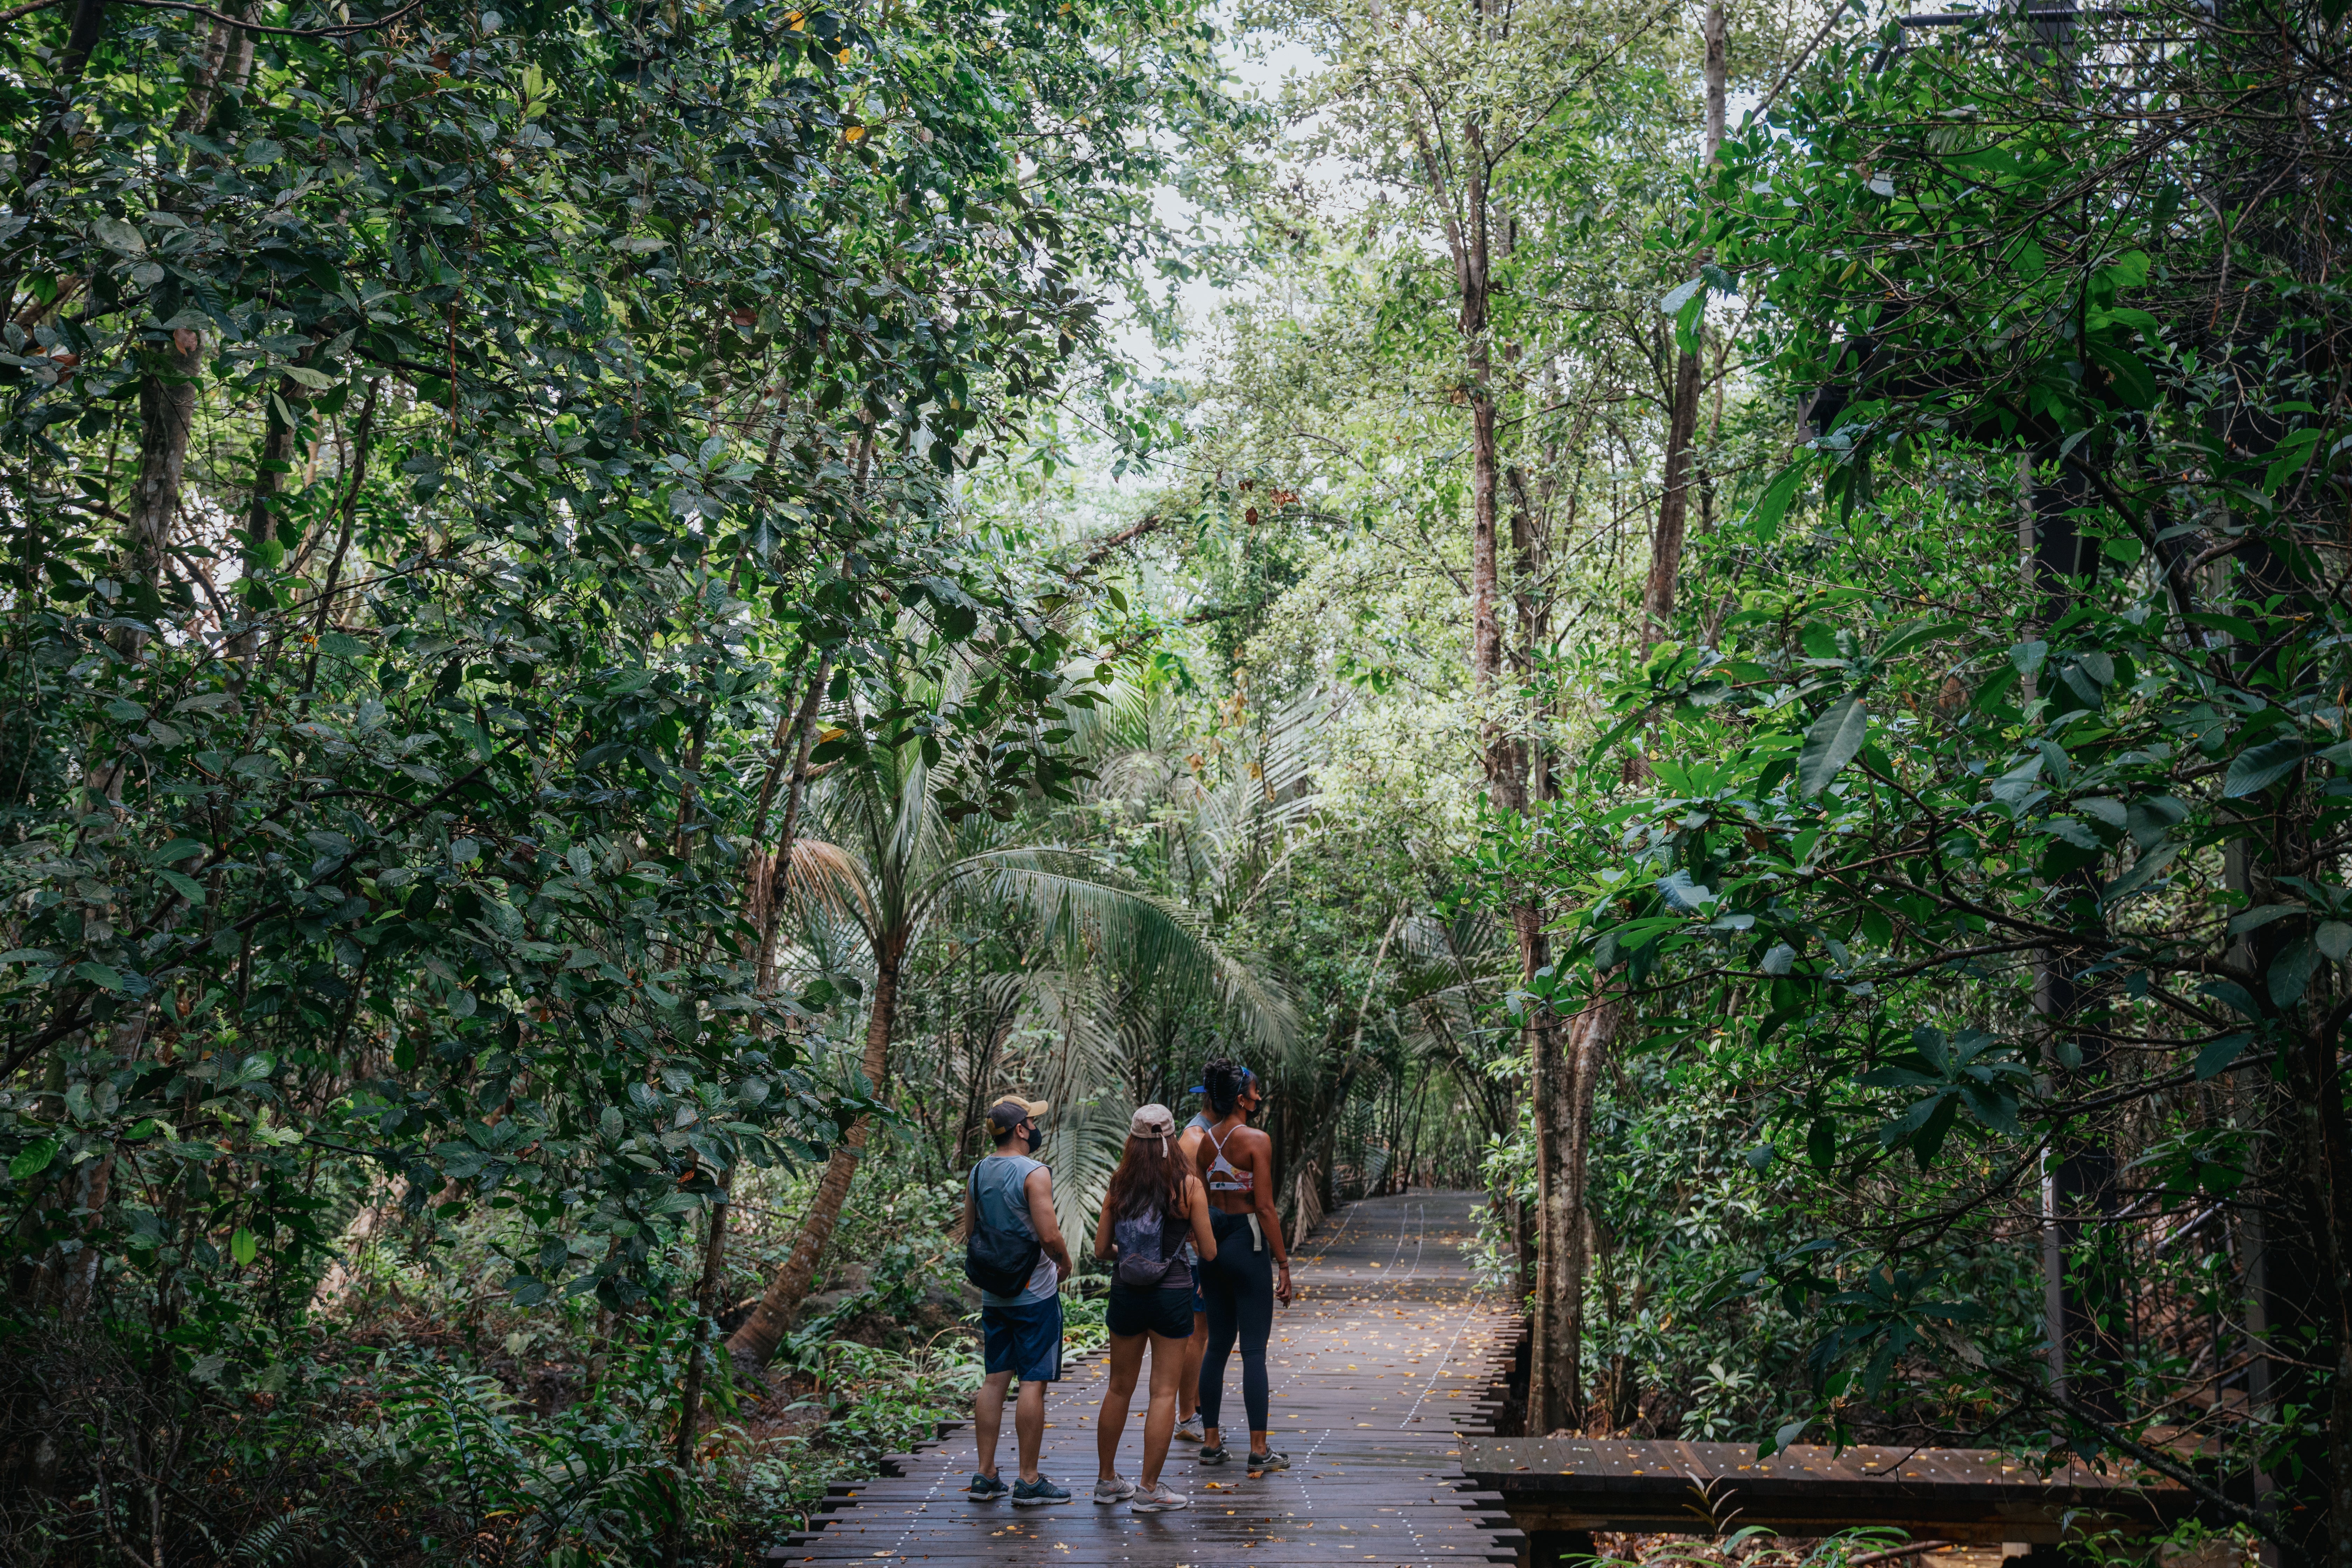 For a brush with Singapore’s wildlife, the Wetlands in Chek Jawa are a must-visit